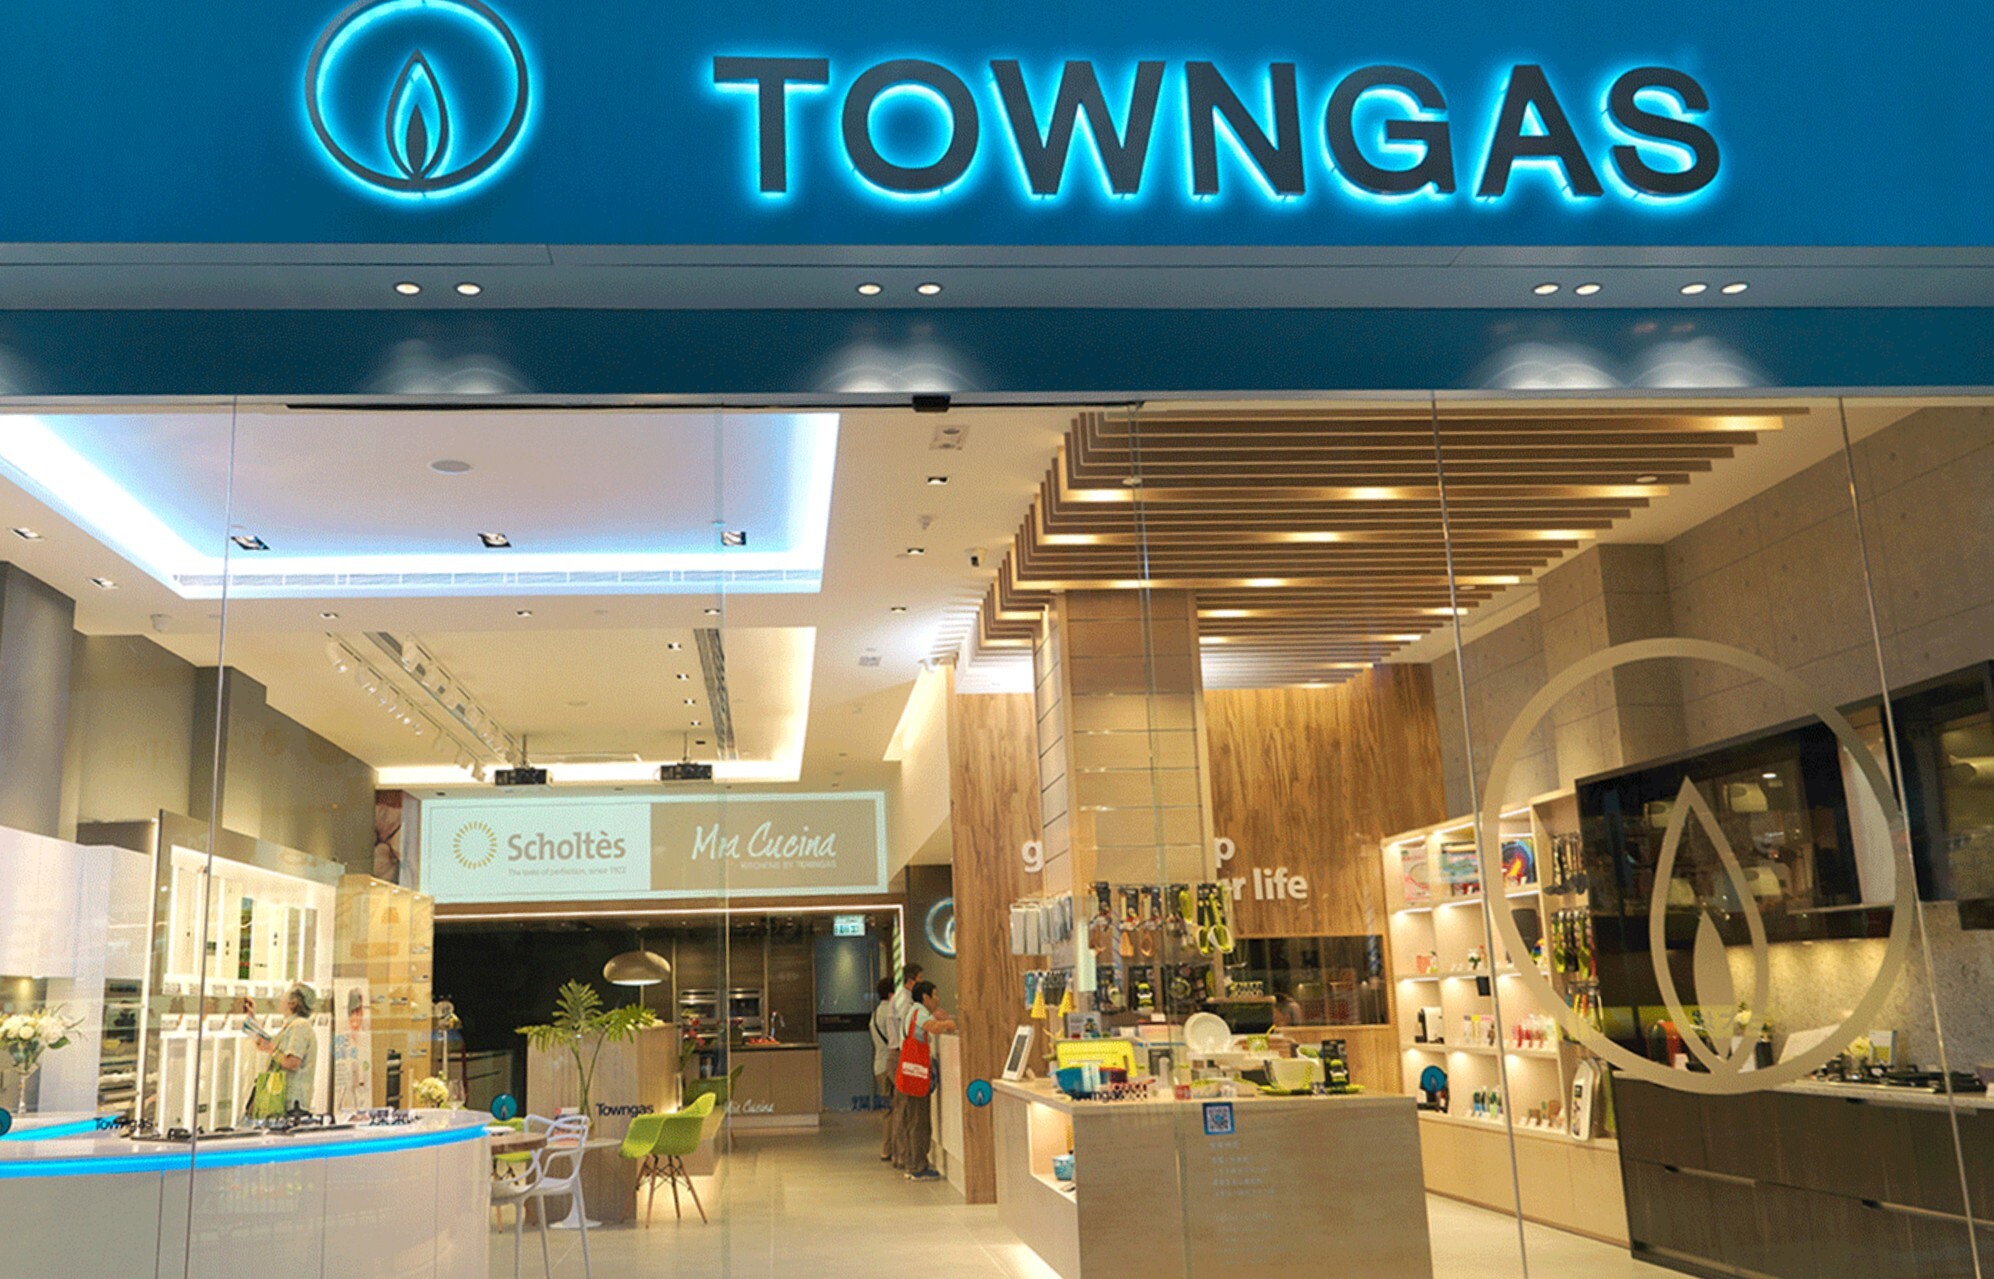 Towngas made its maiden investment in water services in the Greater Bay Area in October 2018, paying 550 million yuan (US$78.6 million) for a 26 per cent stake in Foshan Water Environmental Protection. Photo: Handout